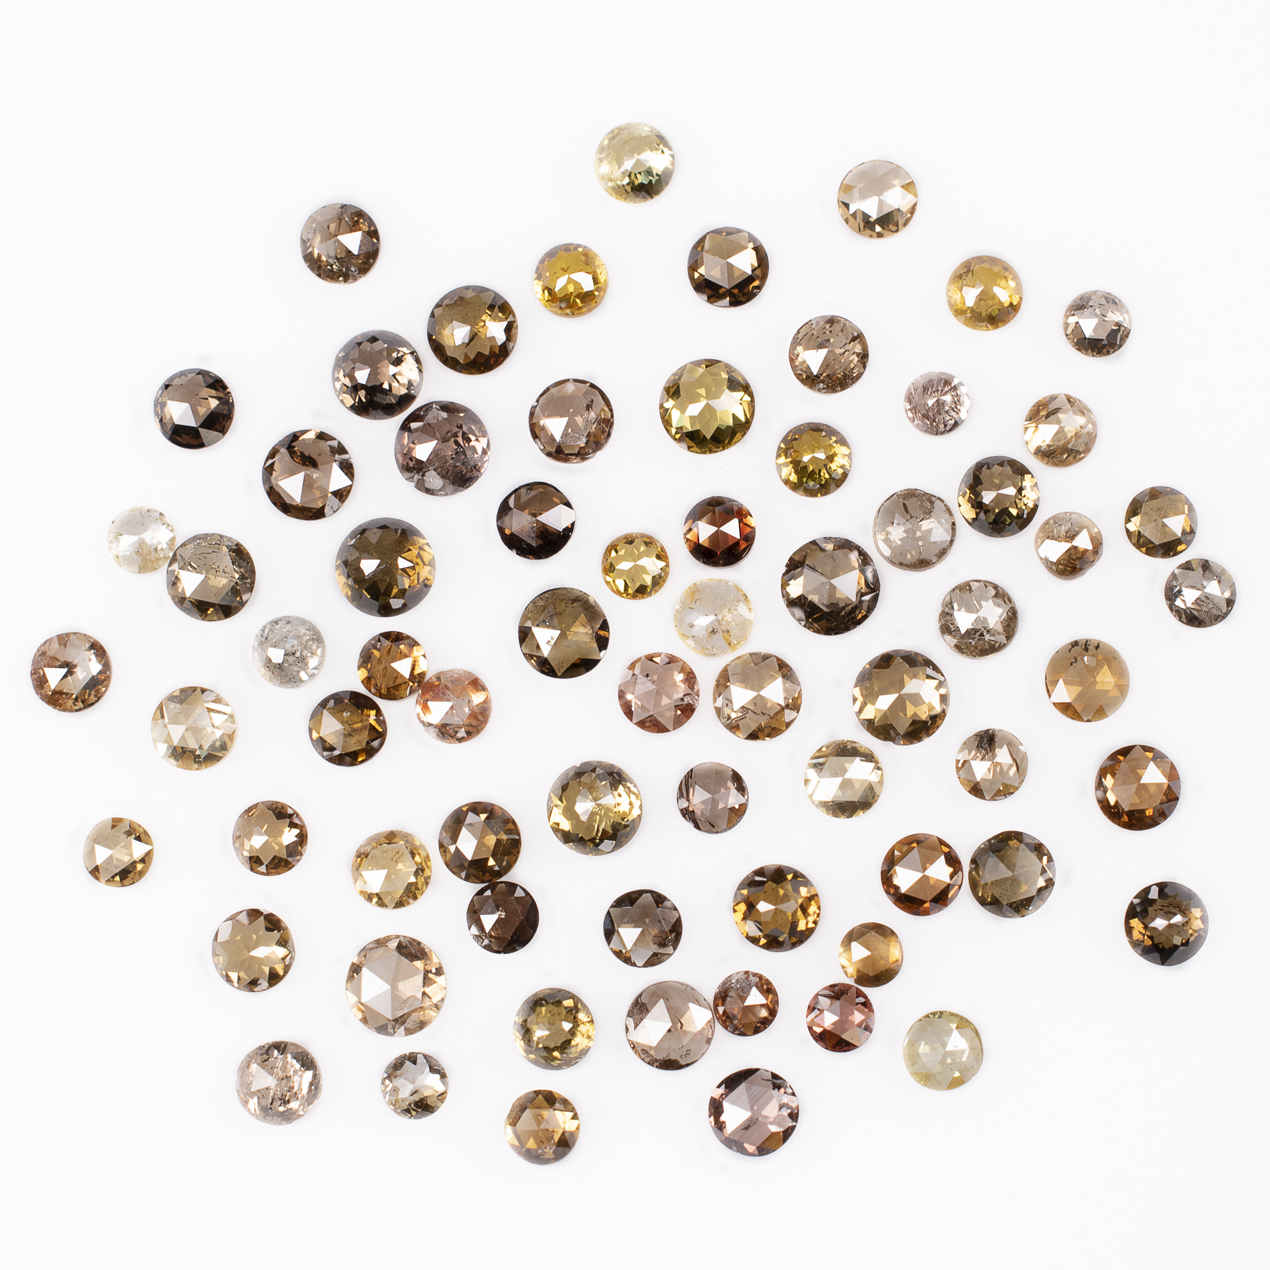 Details about   Rose Cut Diamond Champagne Rough Raw Diamond Faceted Cabochon 1mm-2mm 25Pcs NR00